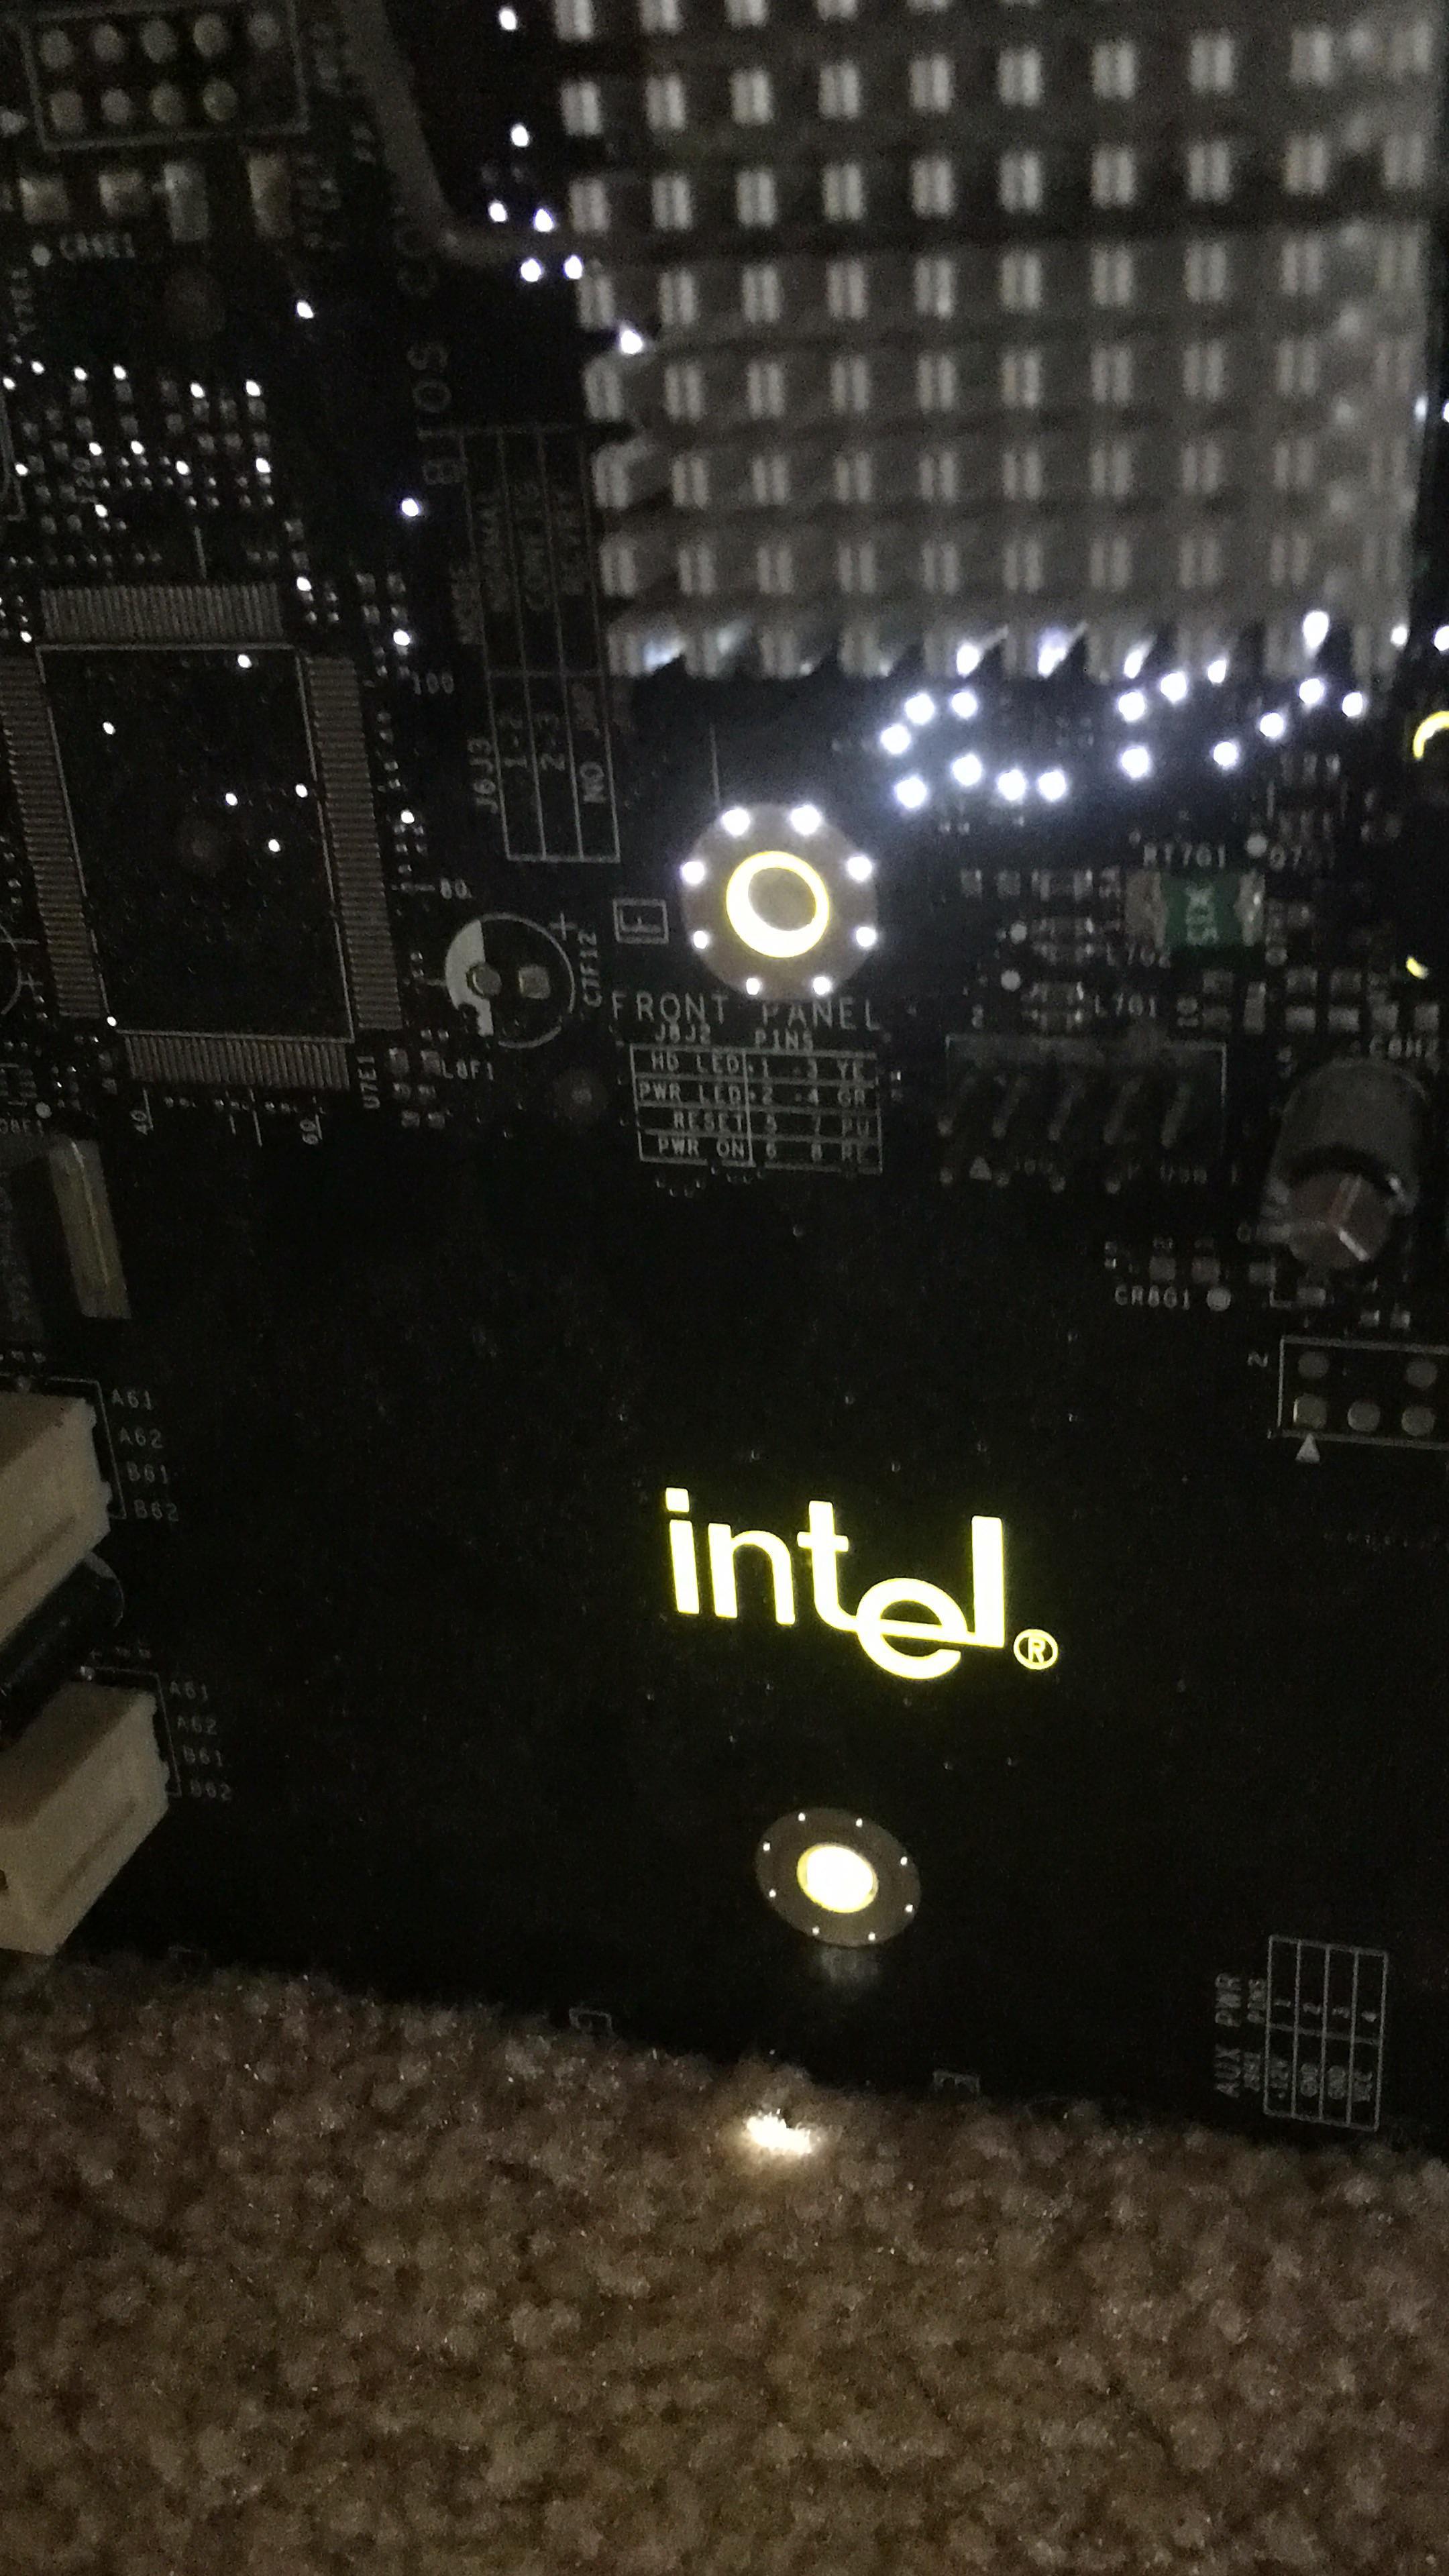 Building with Old Intel Logo - This old motherboard I found has a see through intel logo